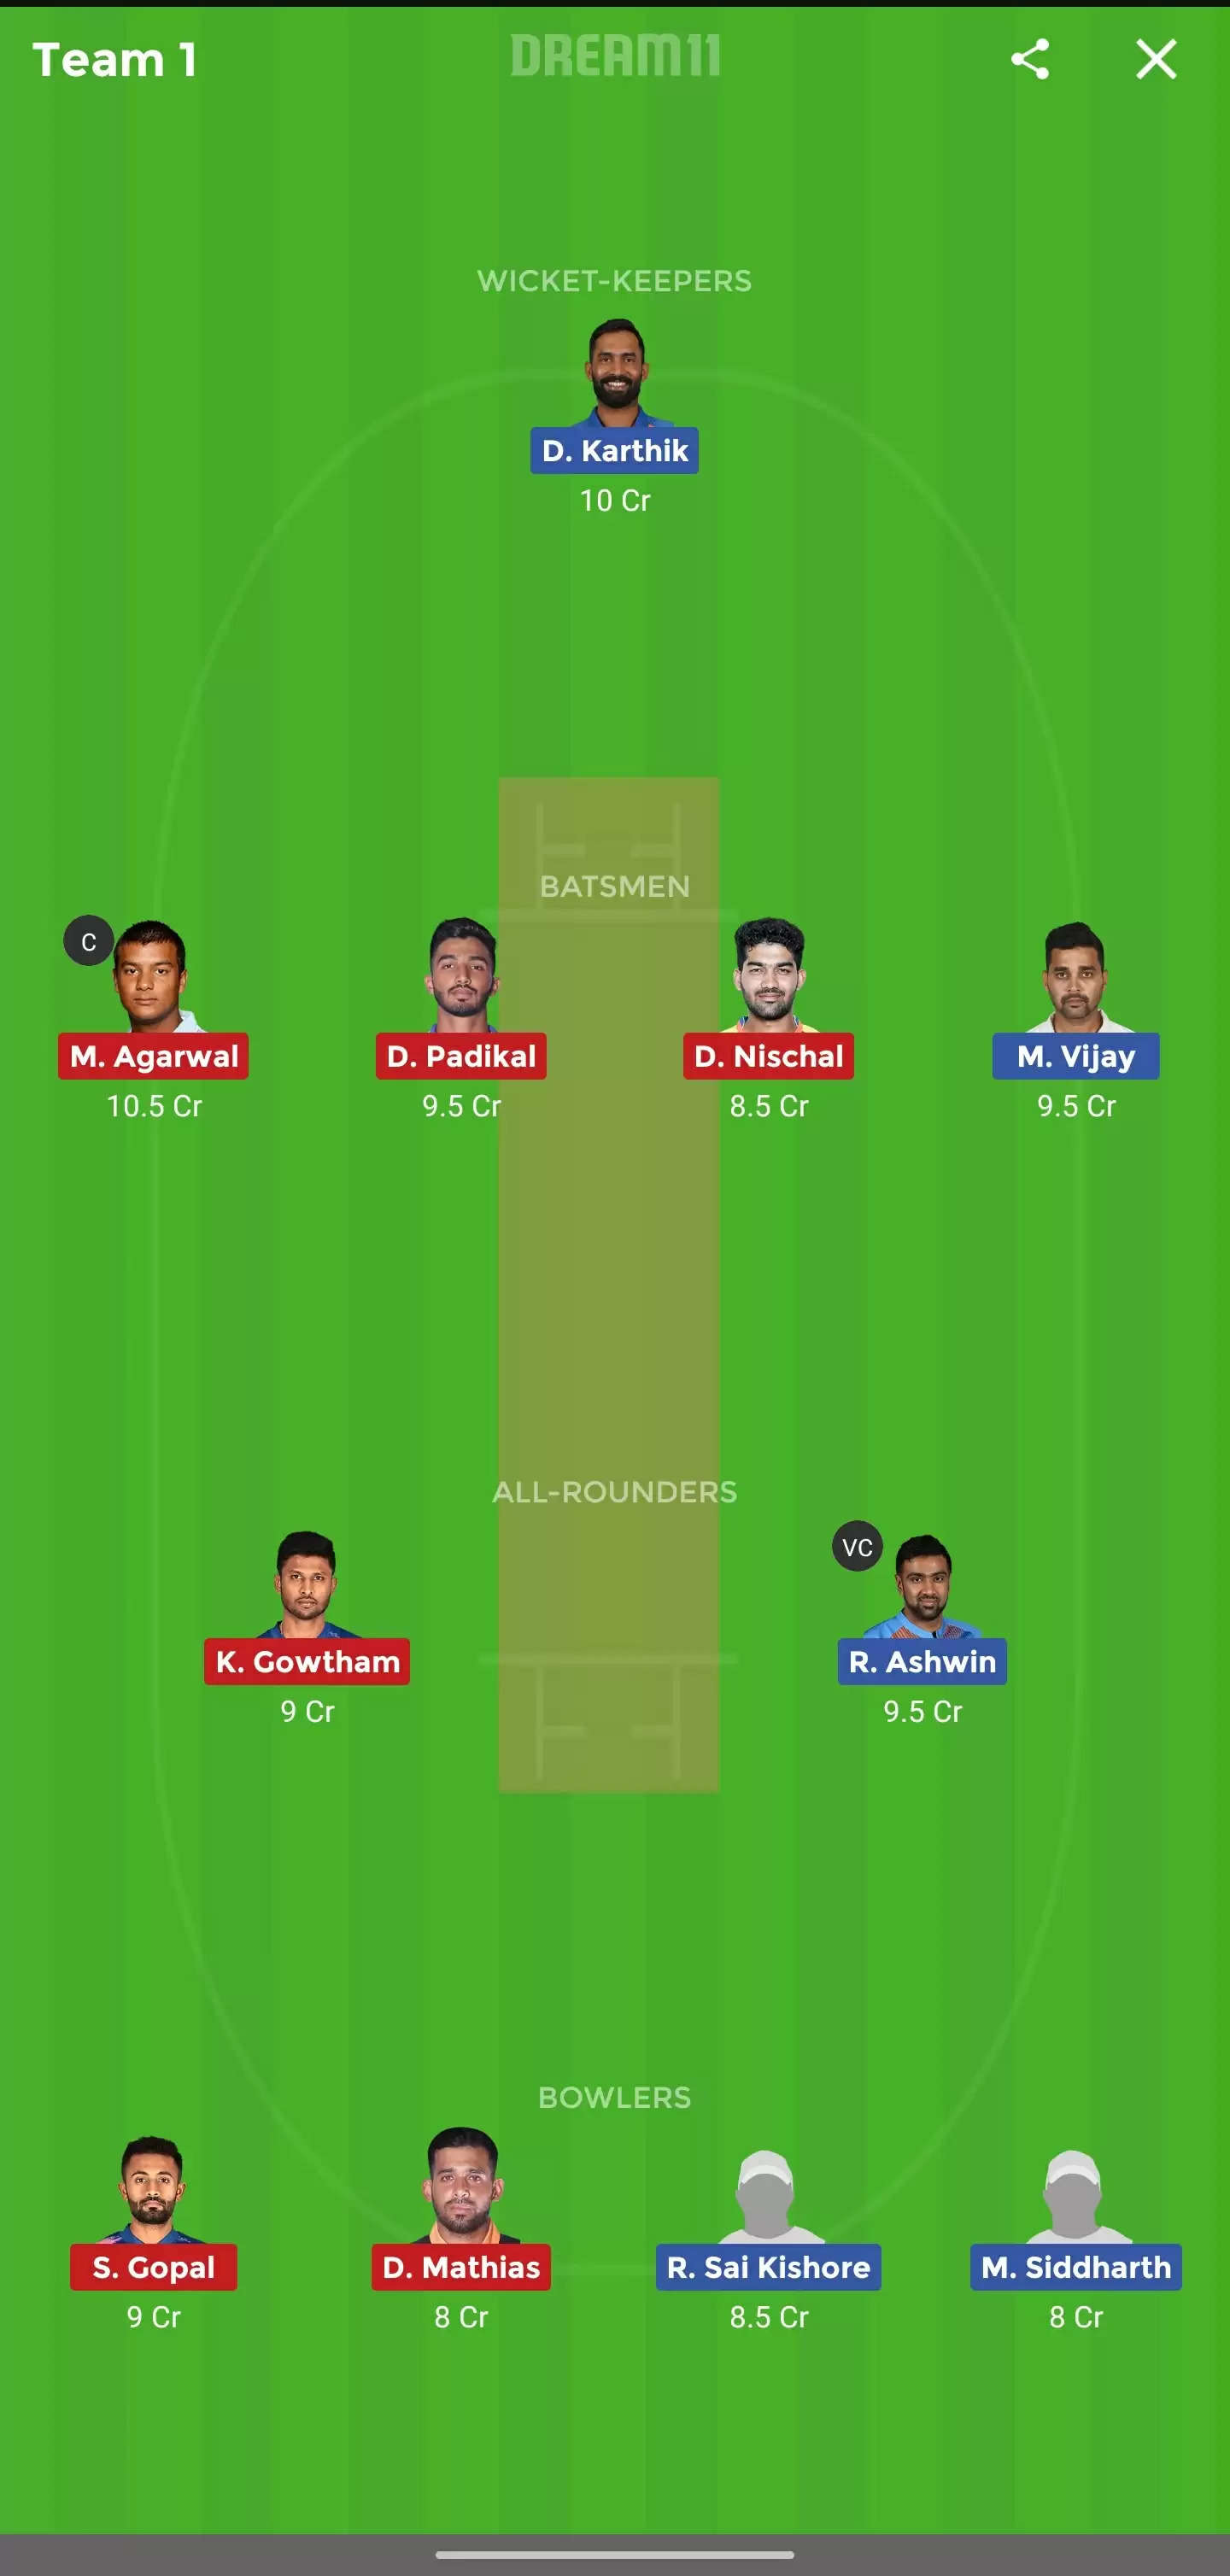 TN vs KAR Dream11 Team Prediction, Ranji Trophy 2019-20, Round 1: Preview, Fantasy Cricket Tips, Probable XI, Pitch Report, & Weather Conditions